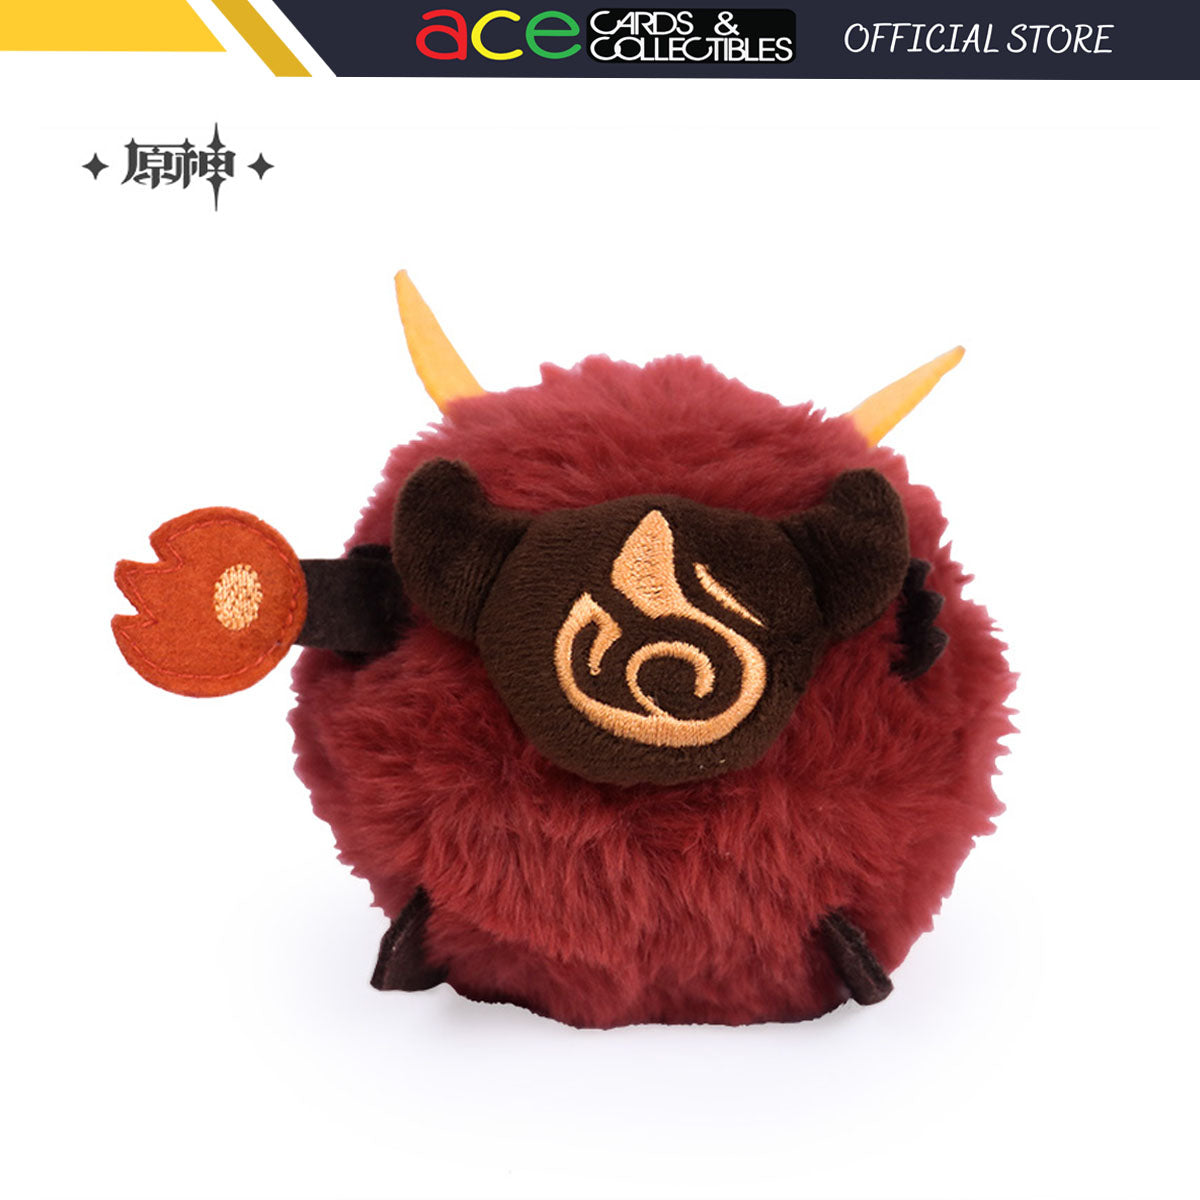 Genshin Impact &quot;Pyro Hillchurl&quot; Plushie Keychain-miHoYo-Ace Cards &amp; Collectibles